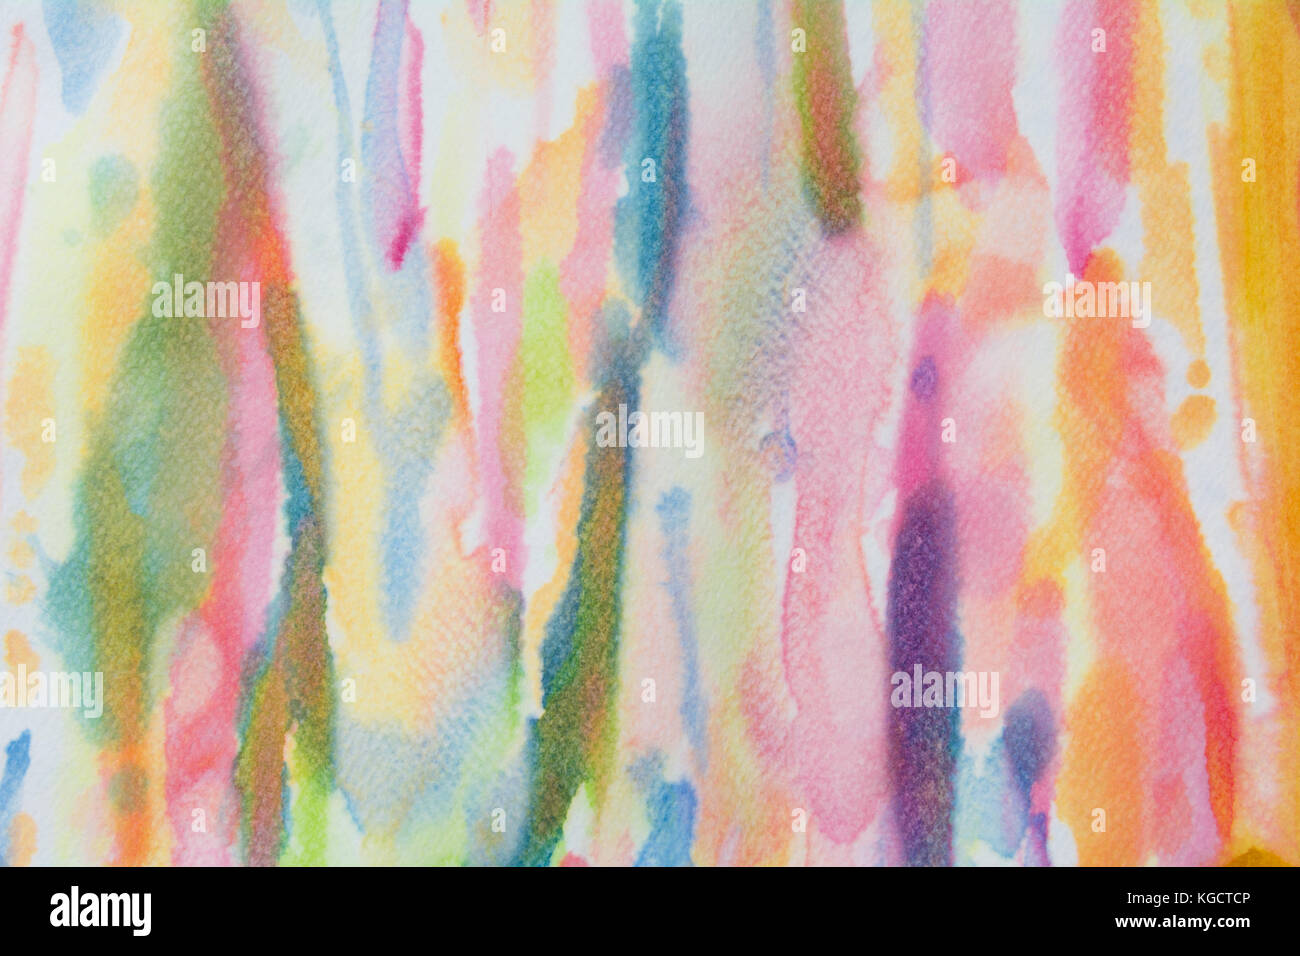 Abstract watercolor on paper. Abstract color background in watercolor style. Stock Photo